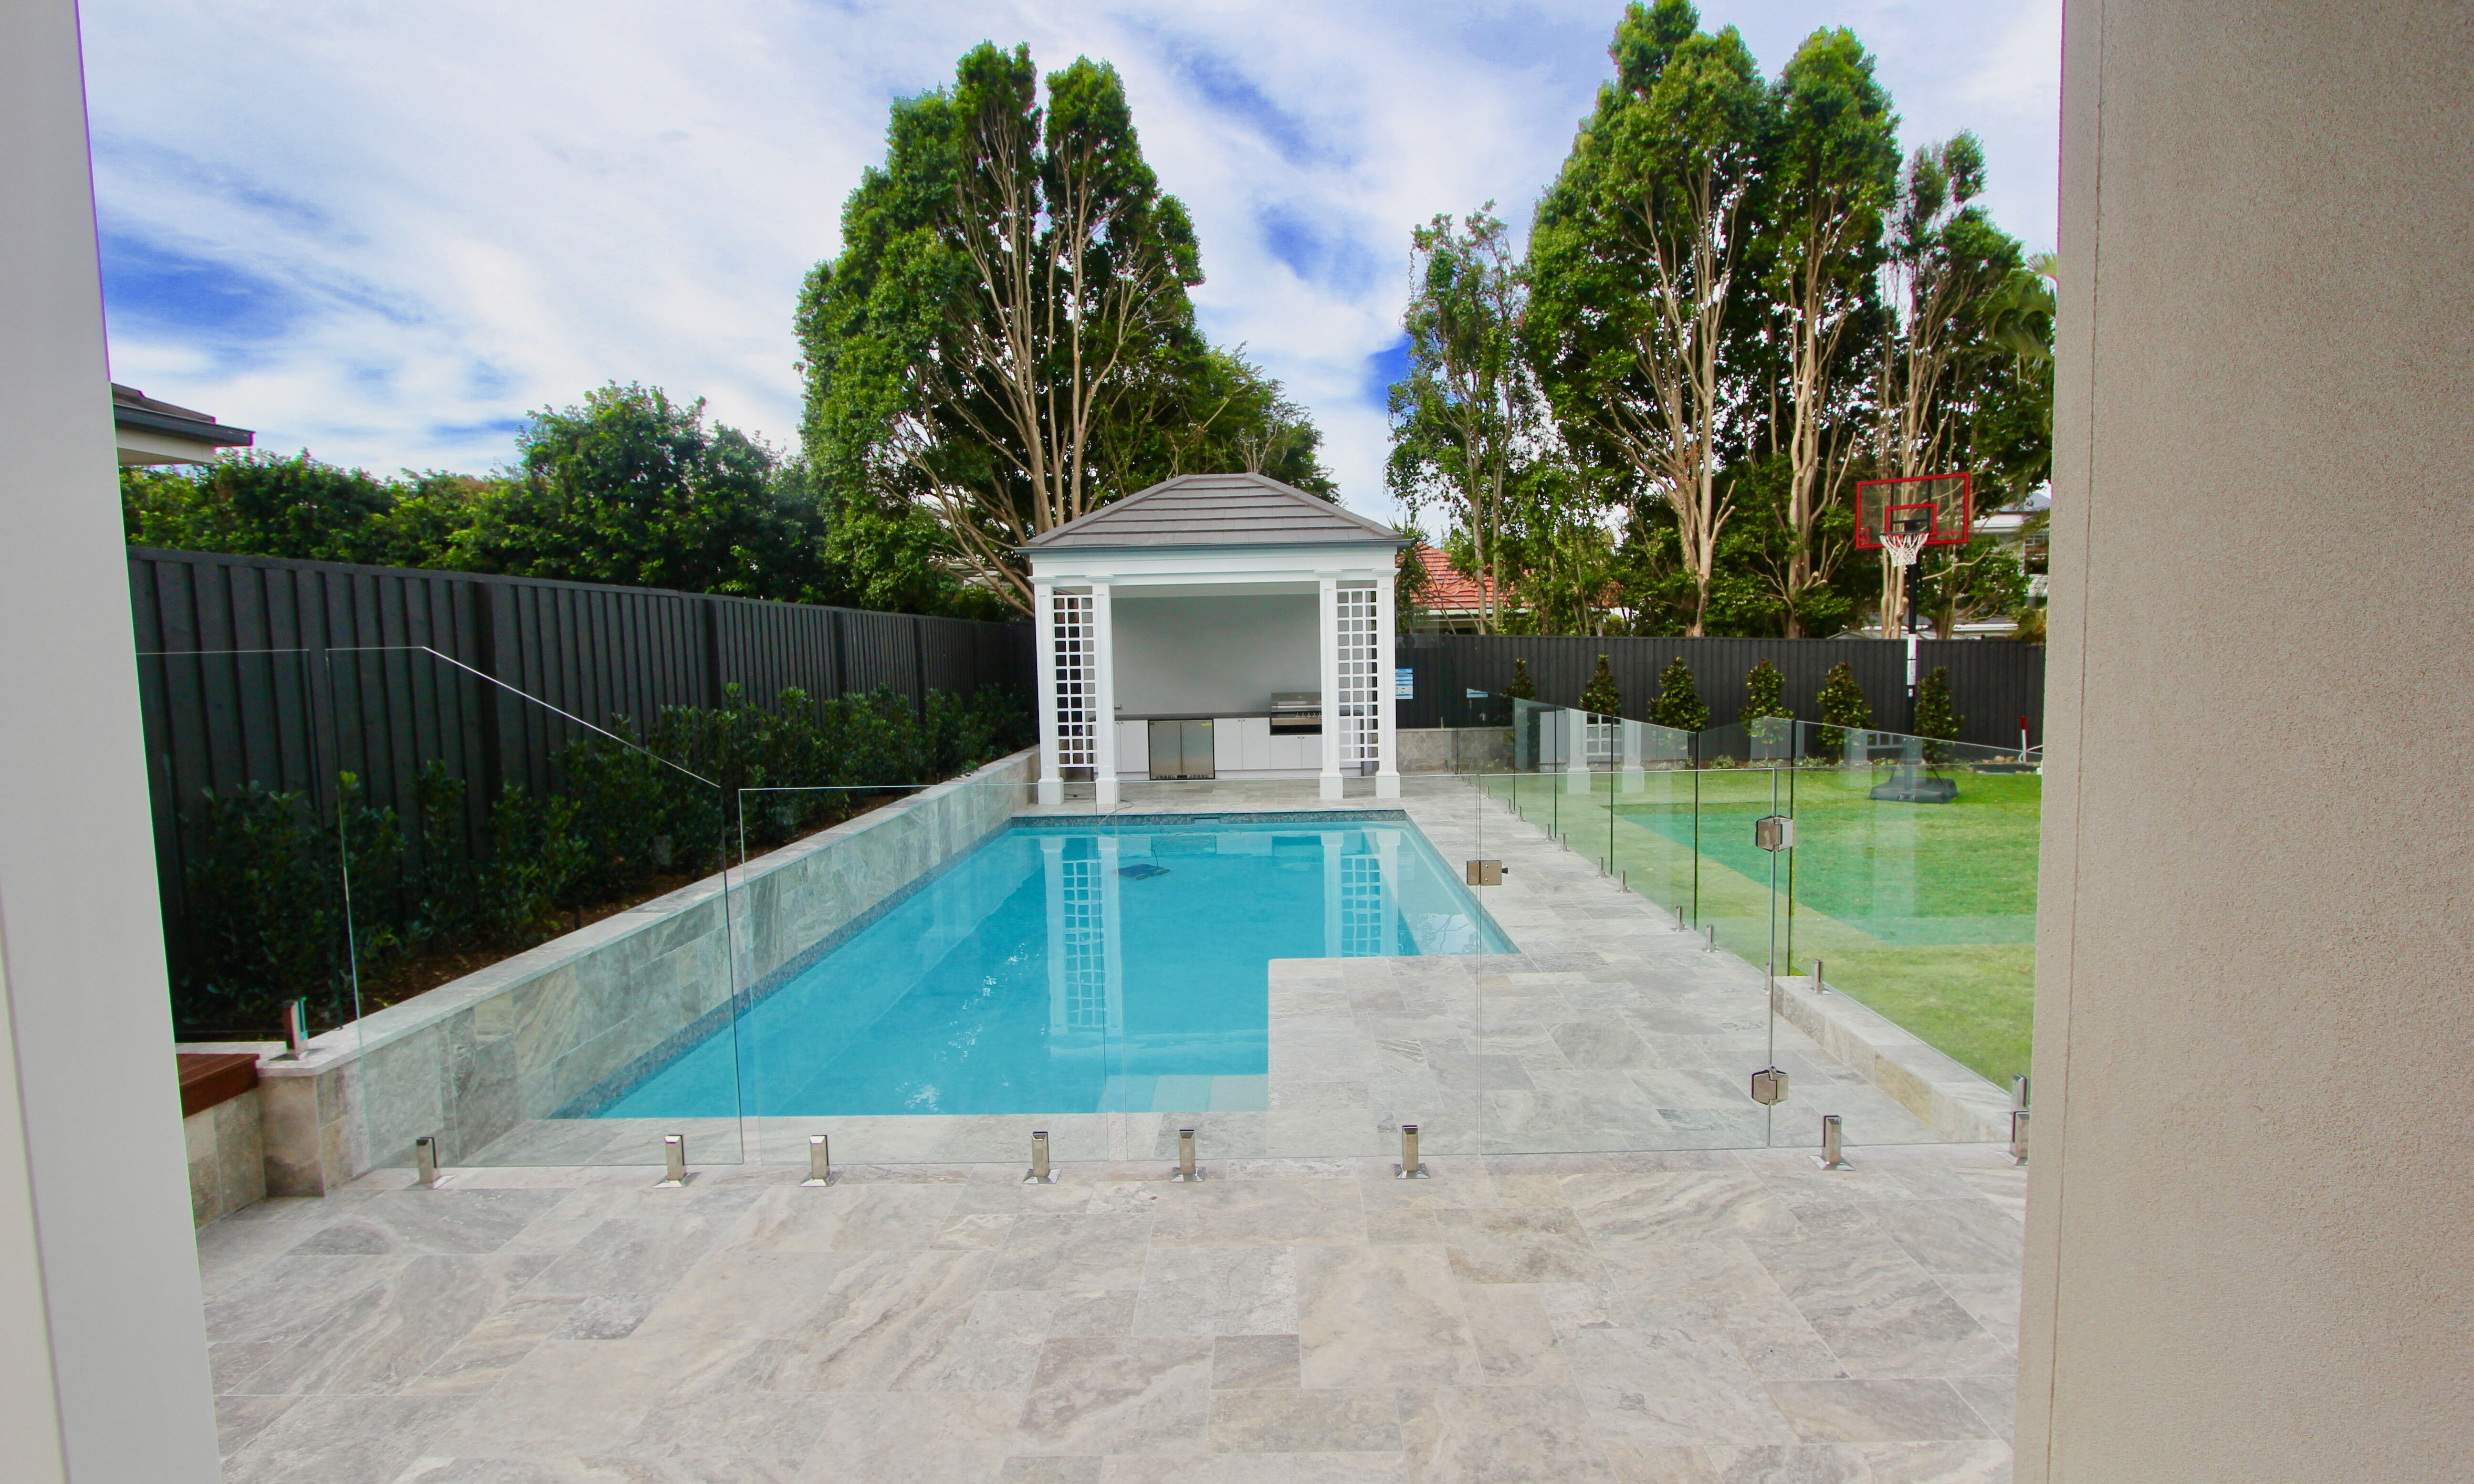 Pool house and Patio Coorparoo